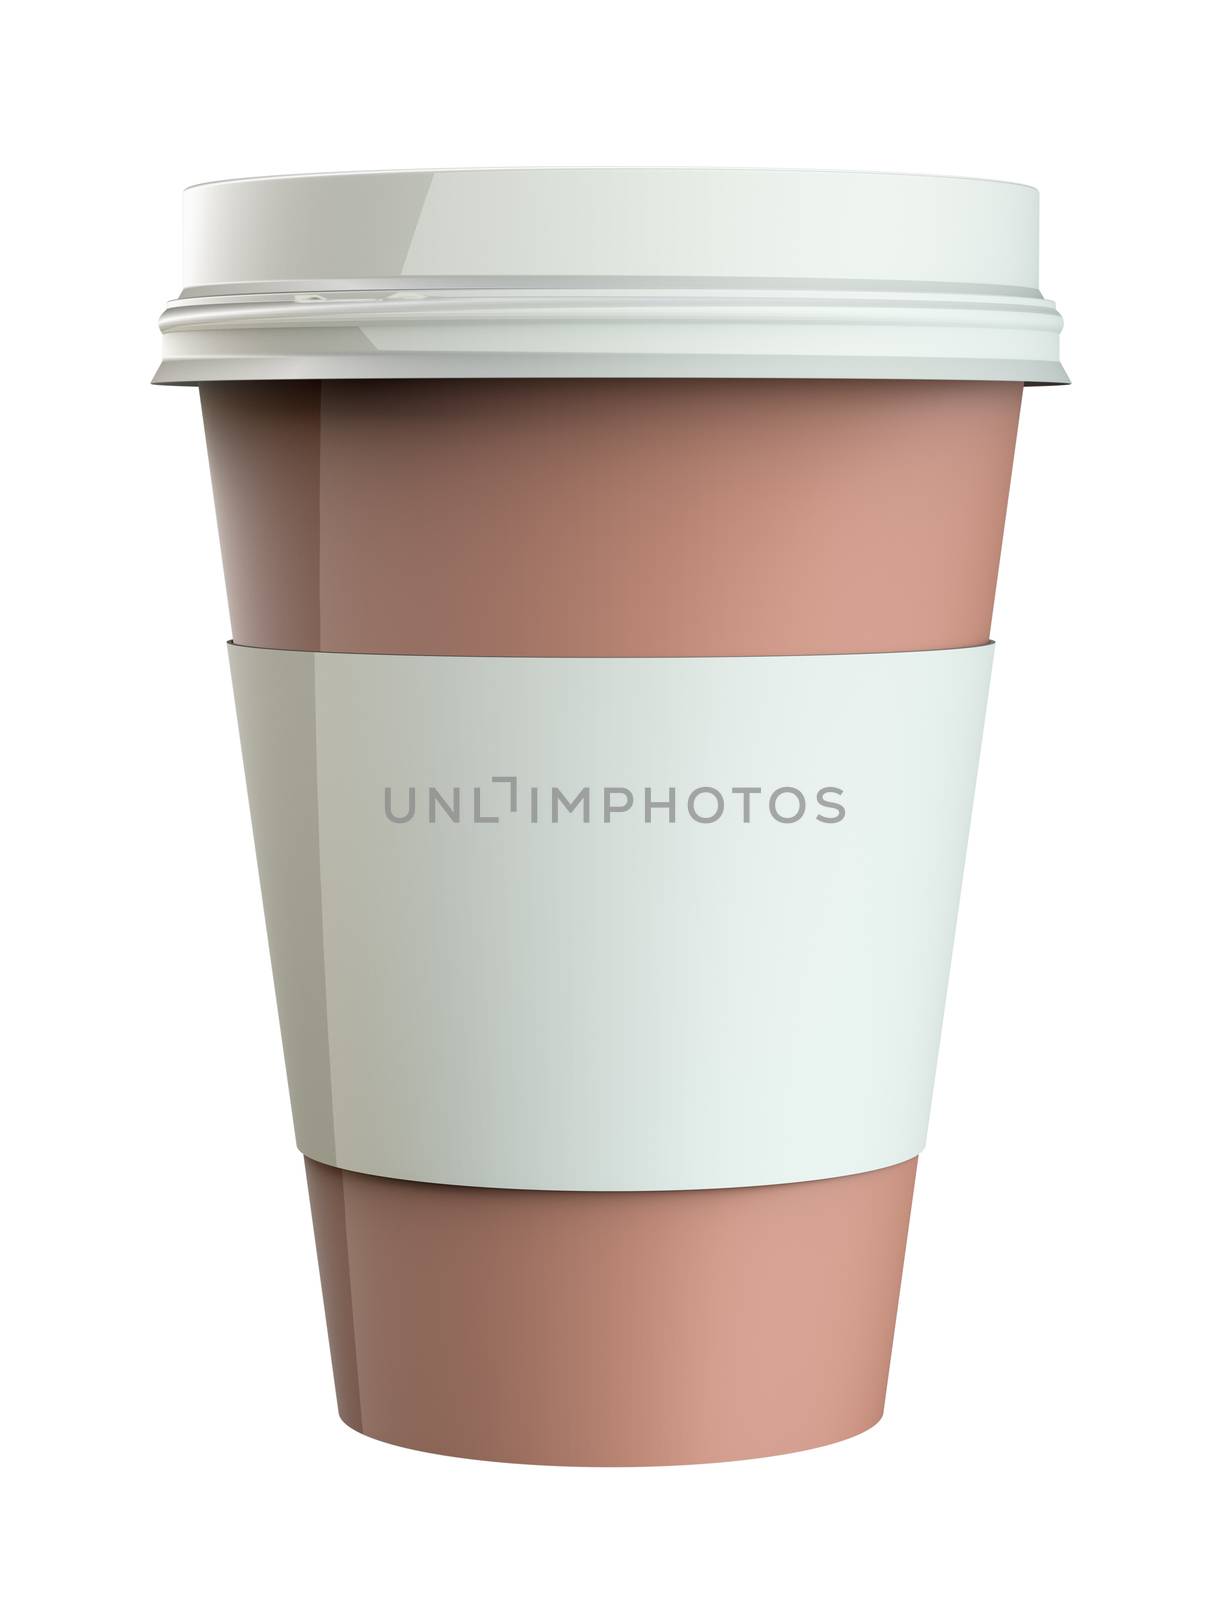 Dispossable coffee cup on white background, 3d illustration